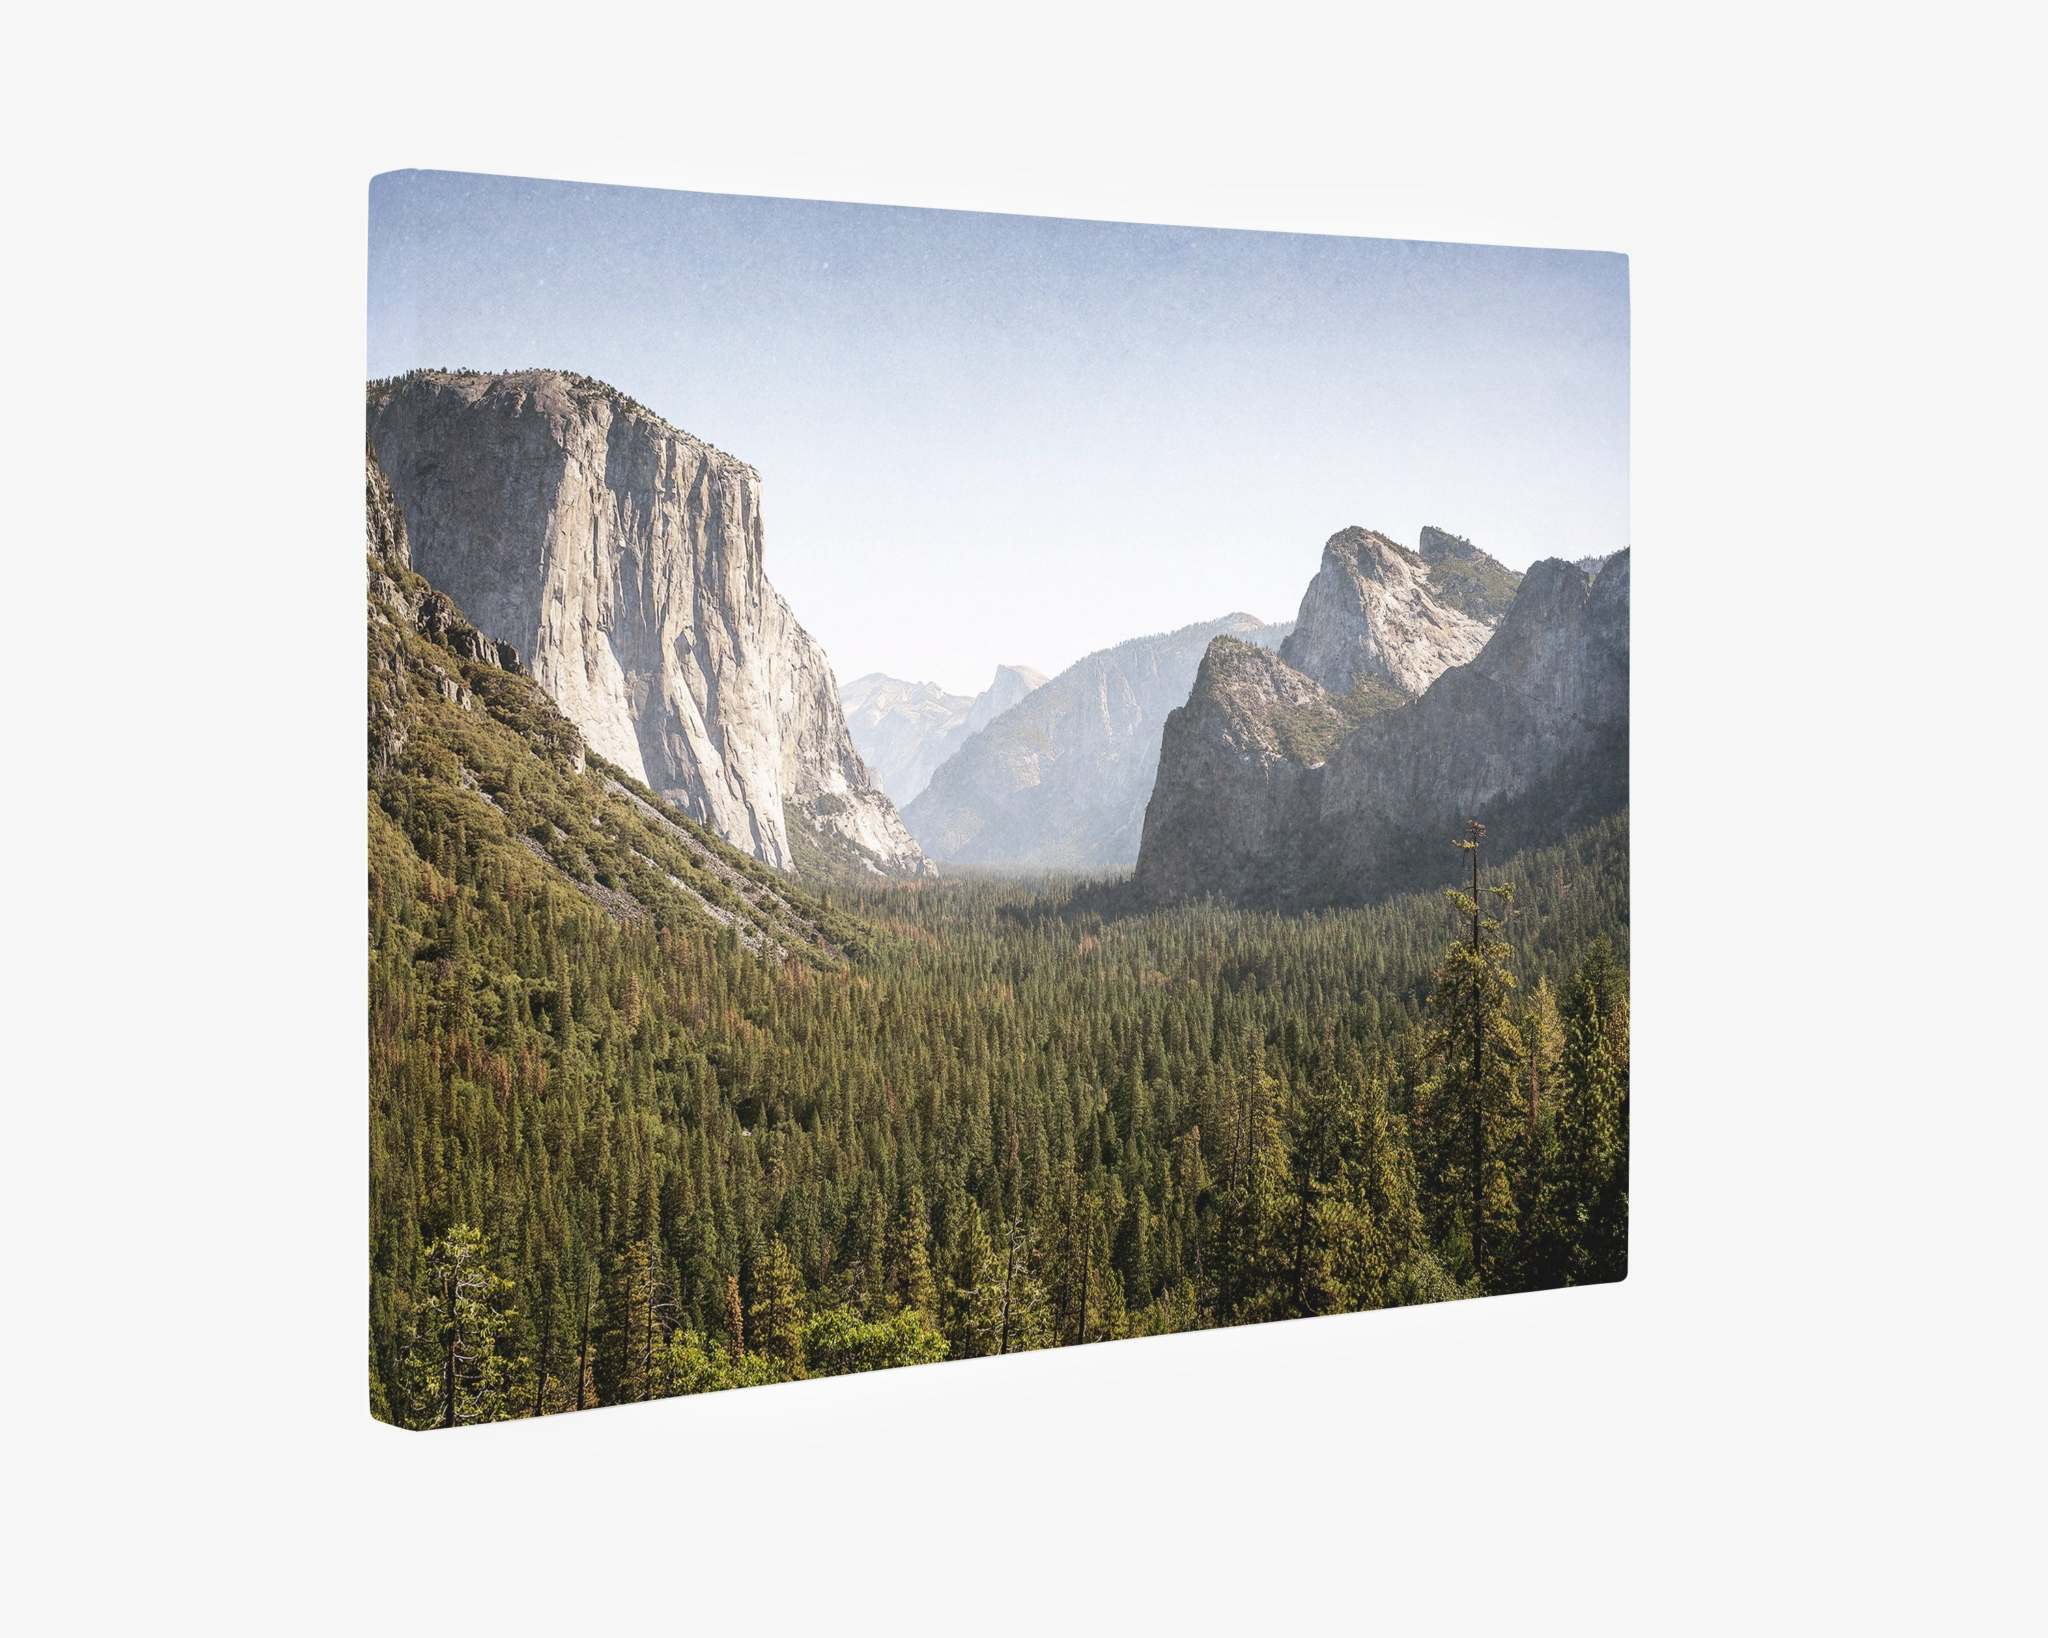 The Northern California Canvas Wall Art, 'Yosemite Valley' by Offley Green showcases a breathtaking view of Yosemite Valley. Towering granite cliffs, including El Capitan on the left, rise above lush green pine forests, with a hazy blue sky overhead, capturing the majestic natural beauty of this iconic part of Yosemite National Park.